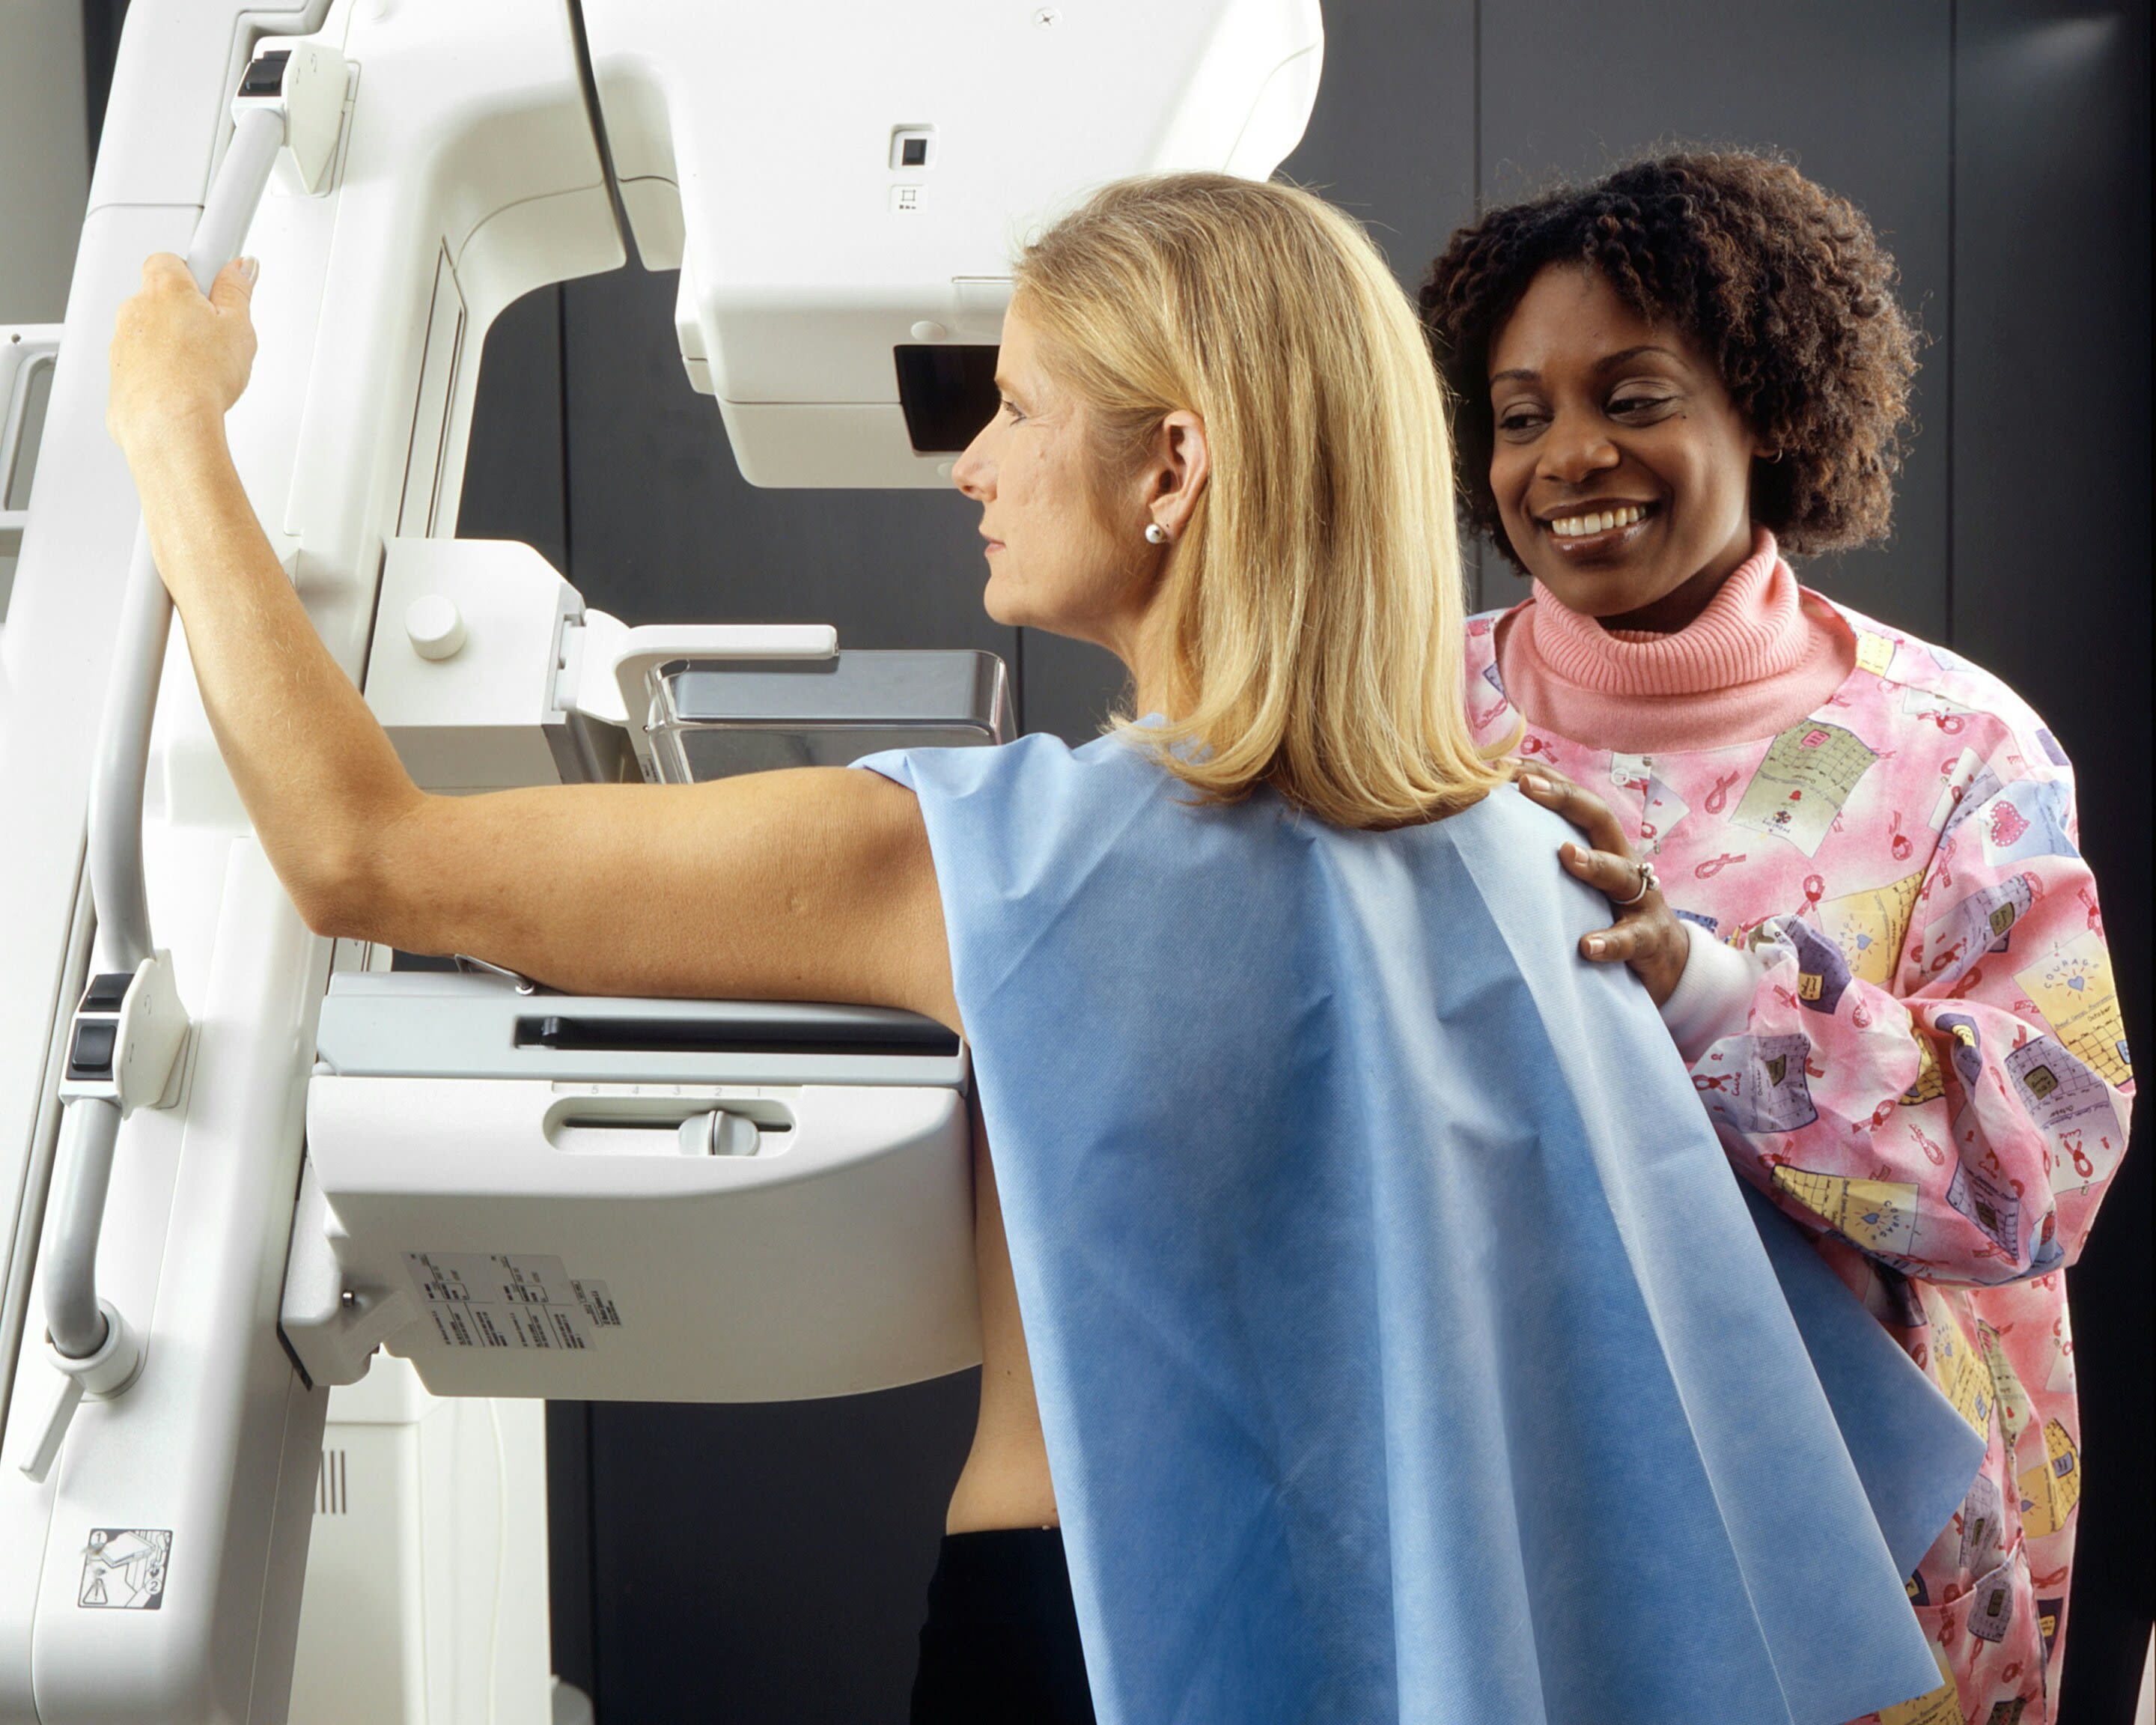 Q&A: Do you know your risks for breast cancer?